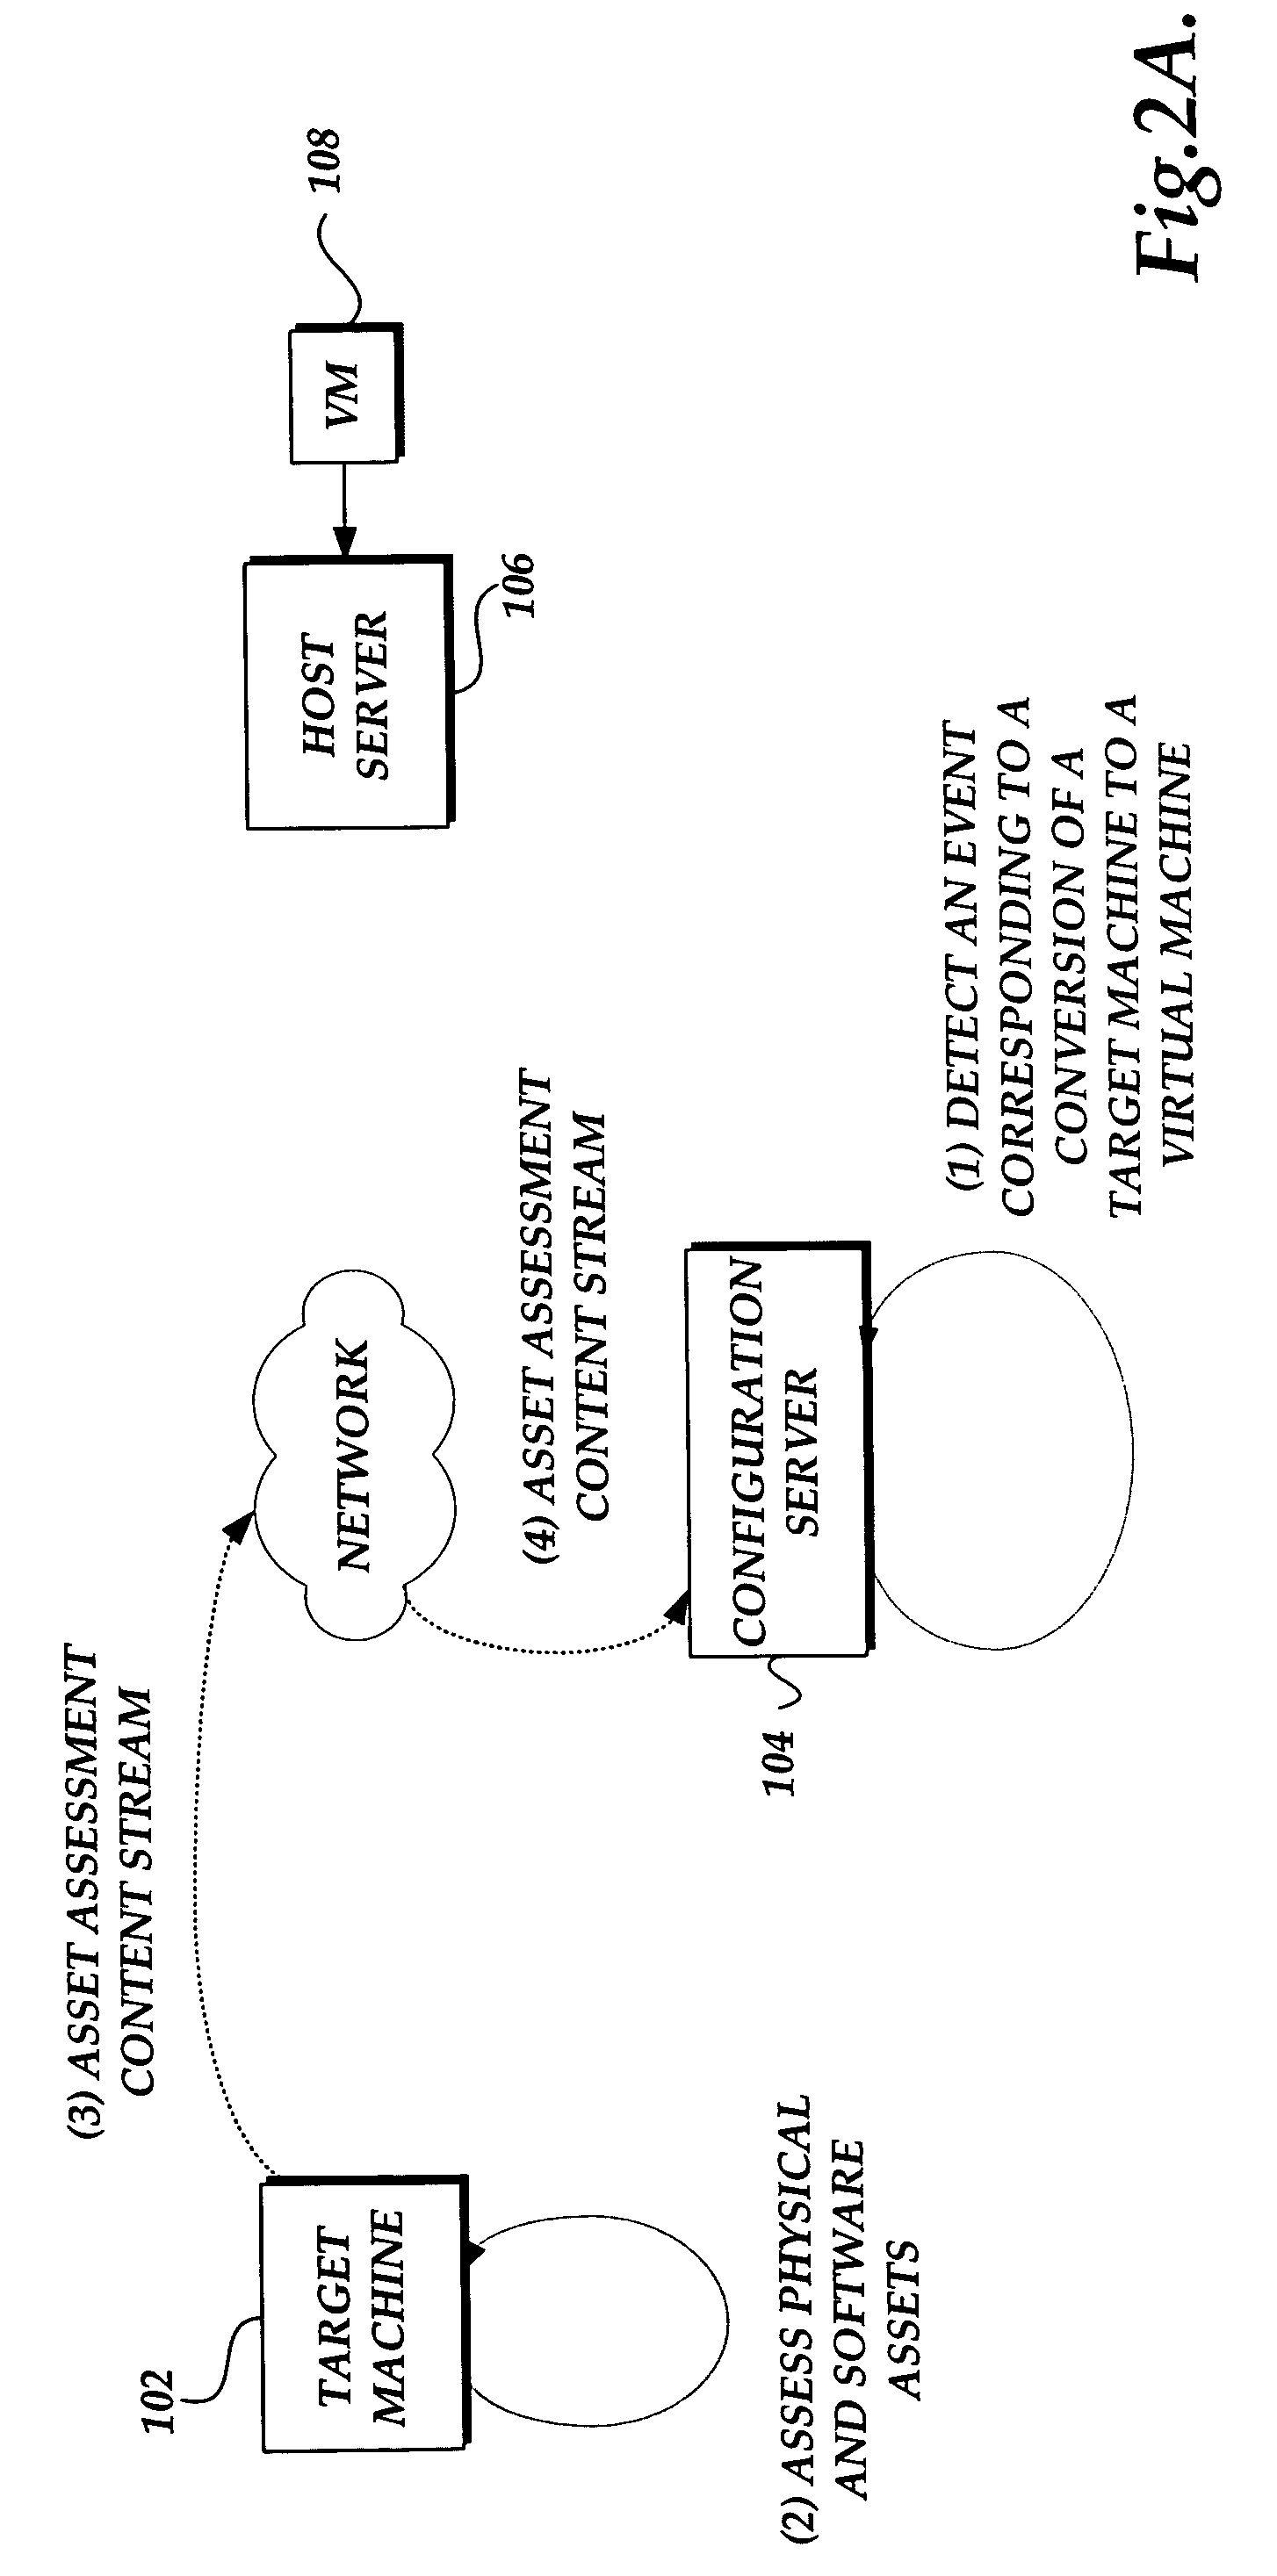 System and method for converting a target computing device to a virtual machine in response to a detected event